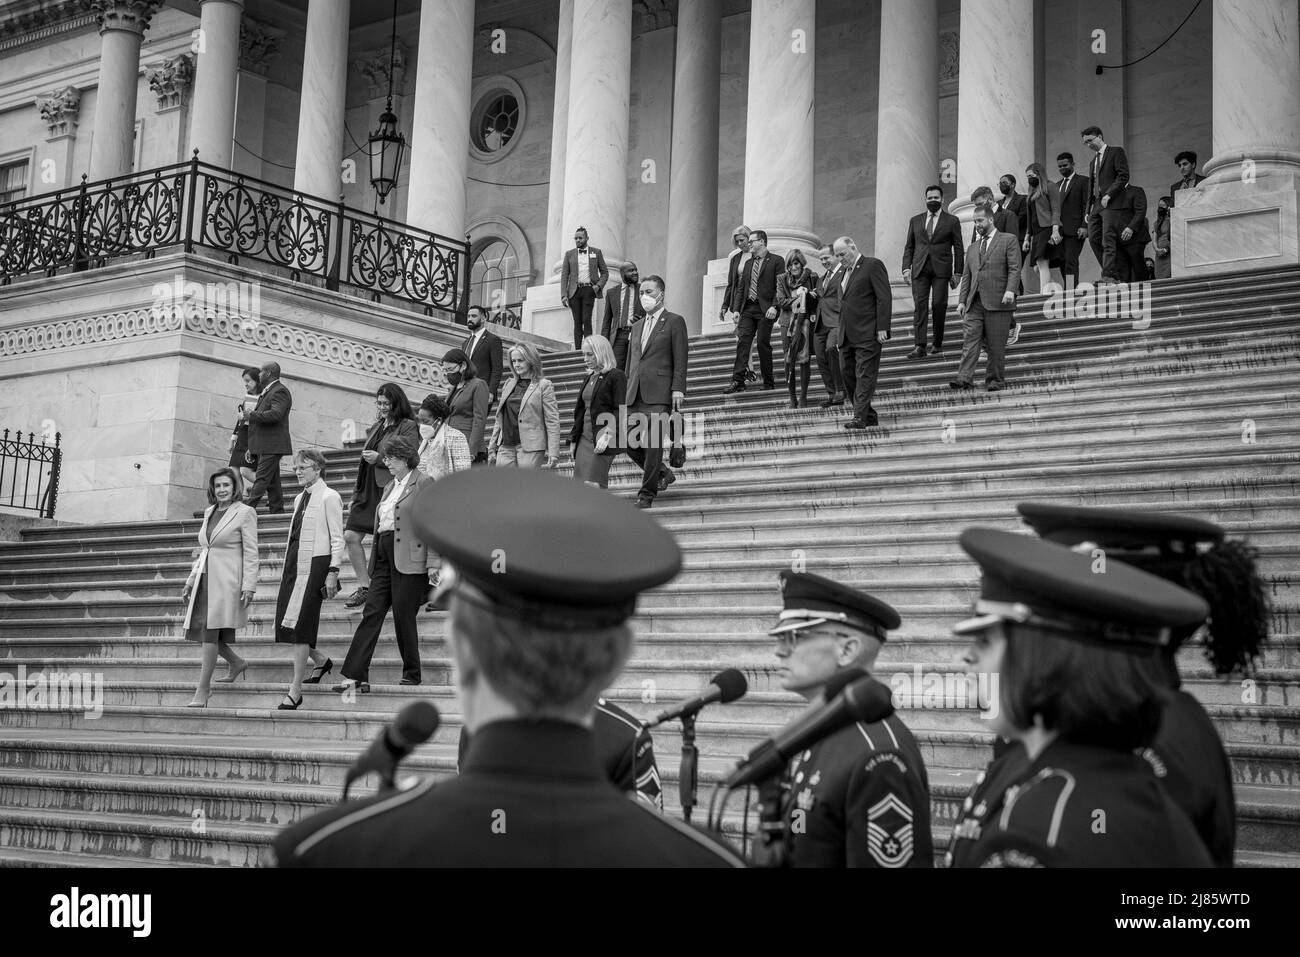 Washington, United States Of America. 12th May, 2022. Speaker of the United States House of Representatives Nancy Pelosi (Democrat of California) and a fraction of the Democratic members of the House of Representatives arrive for Moment of Silence for the One Million American Lives Lost to COVID-19, on the East Front Center Steps at the US Capitol in Washington, DC, Thursday, May 12, 2022. Credit: Rod Lamkey/CNP/Sipa USA Credit: Sipa USA/Alamy Live News Stock Photo